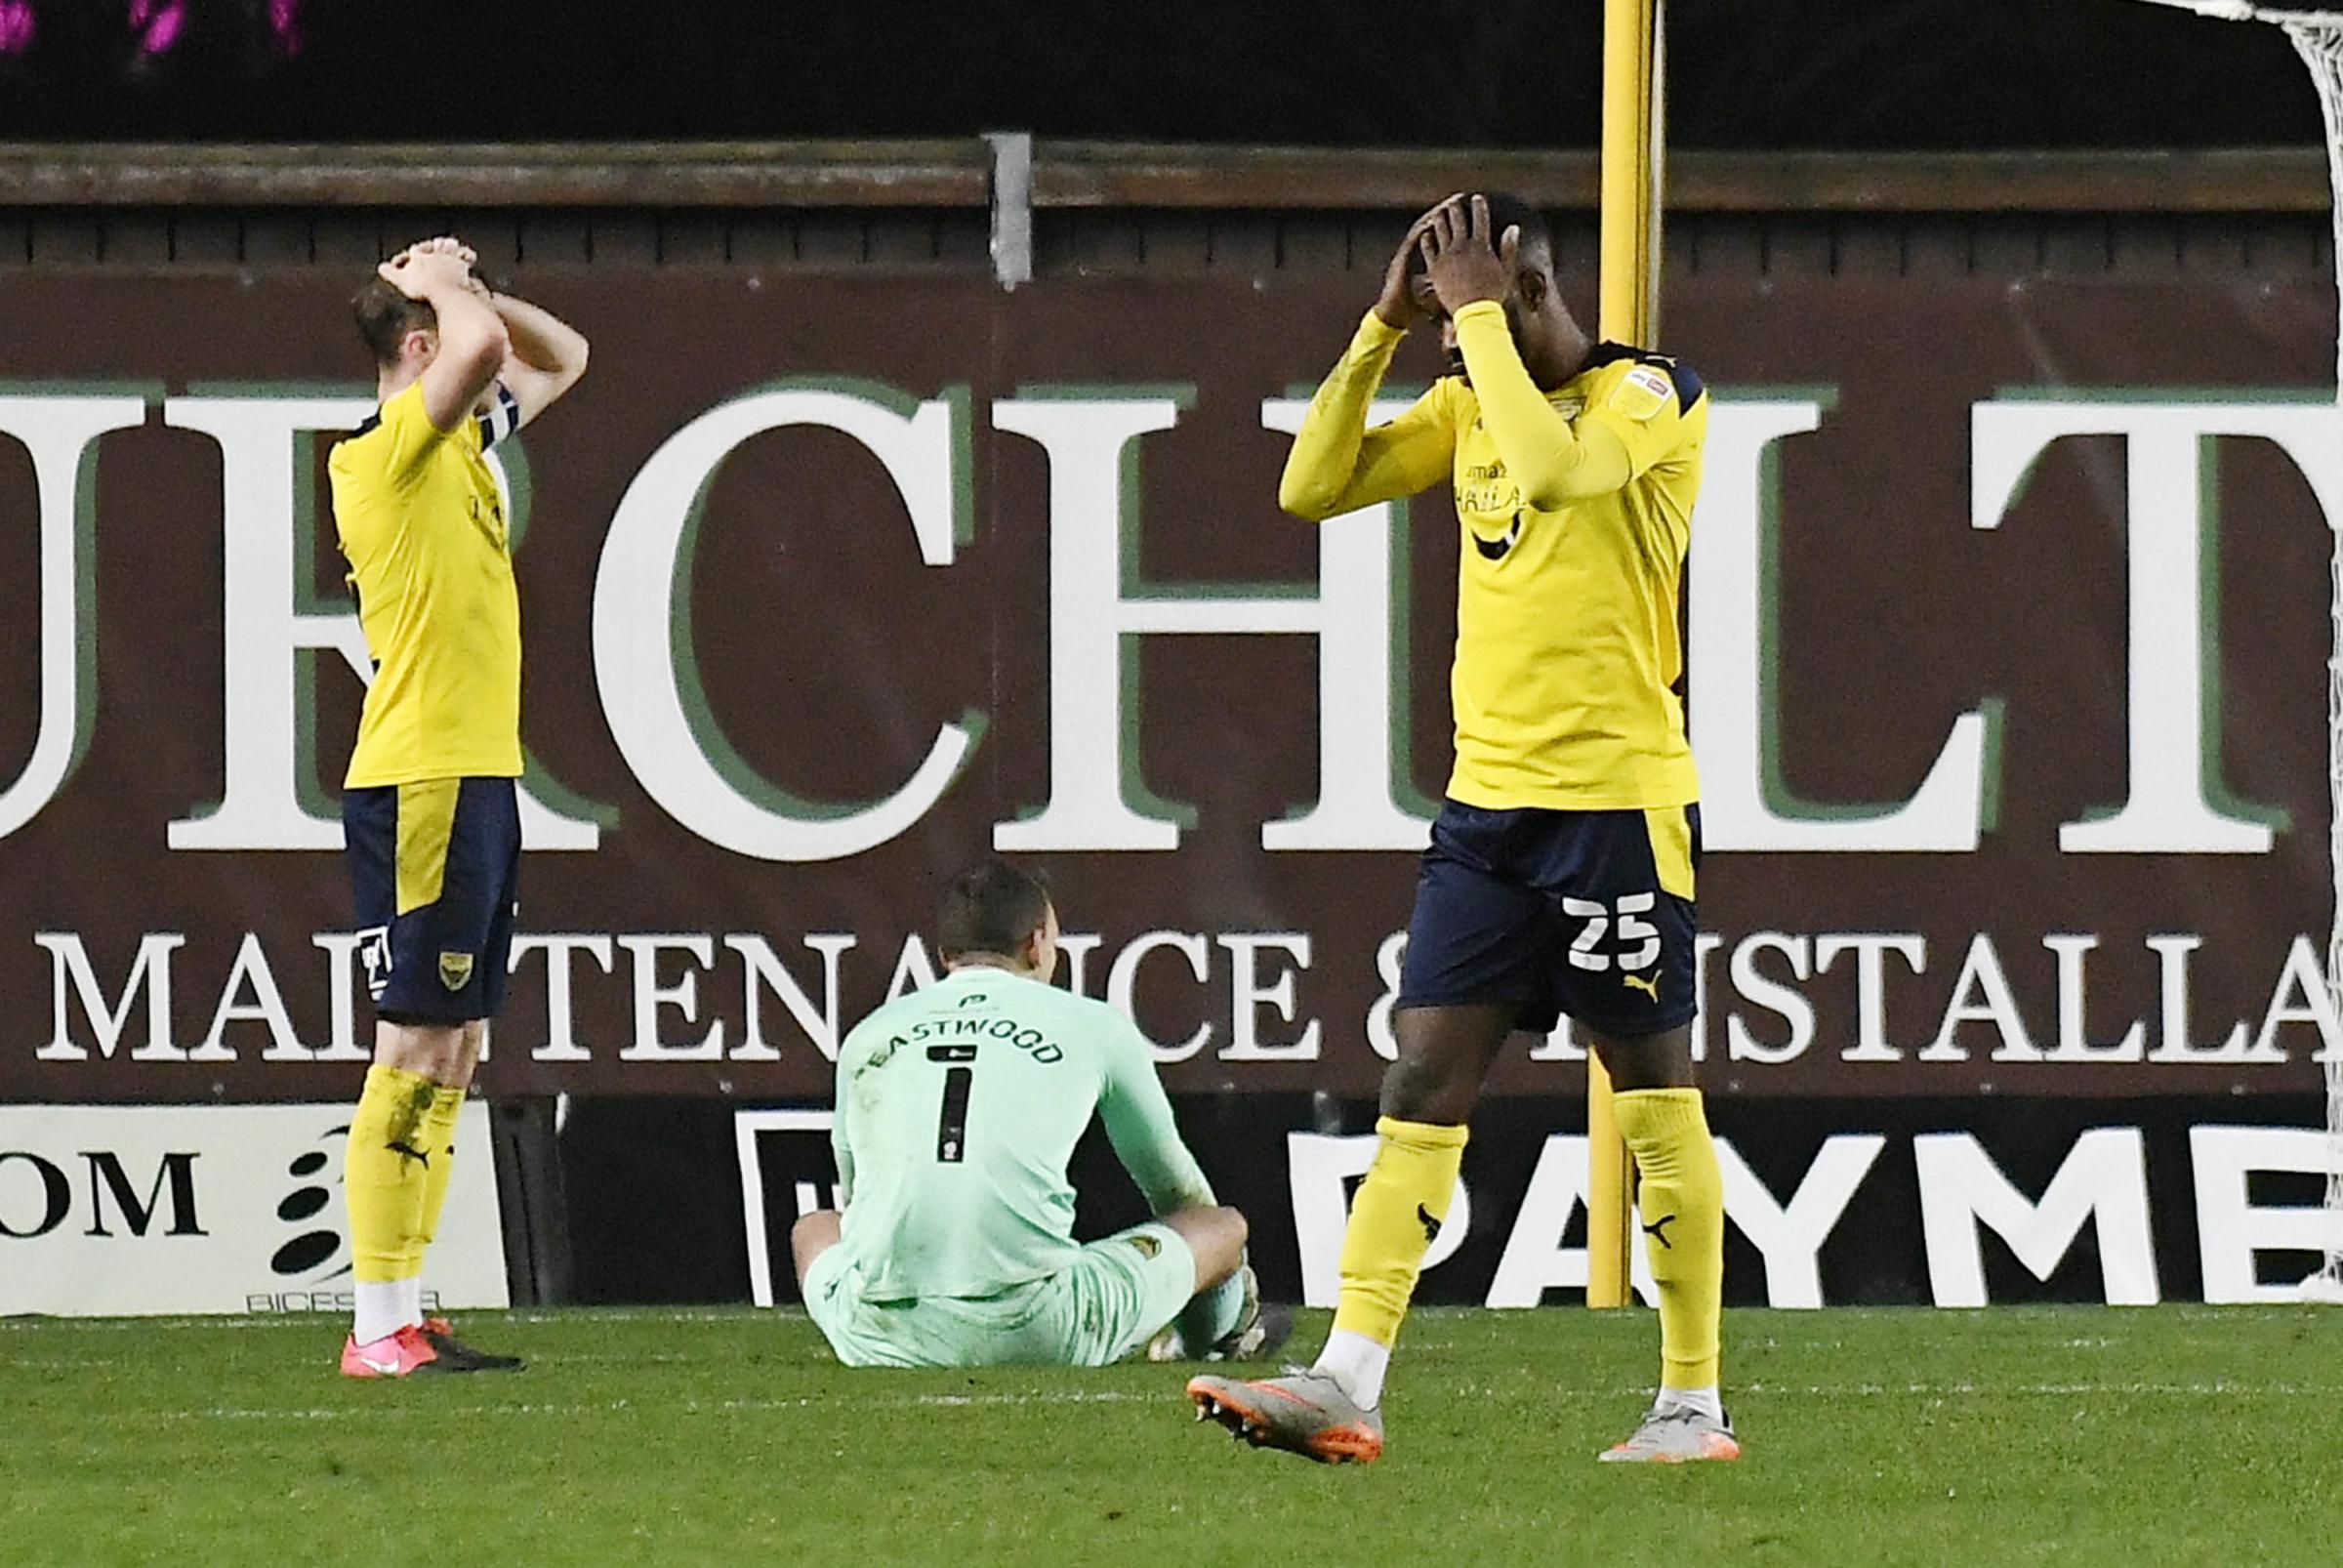 Oxford United cannot believe it as they concede late to lose to Swindon Town Picture: David Fleming